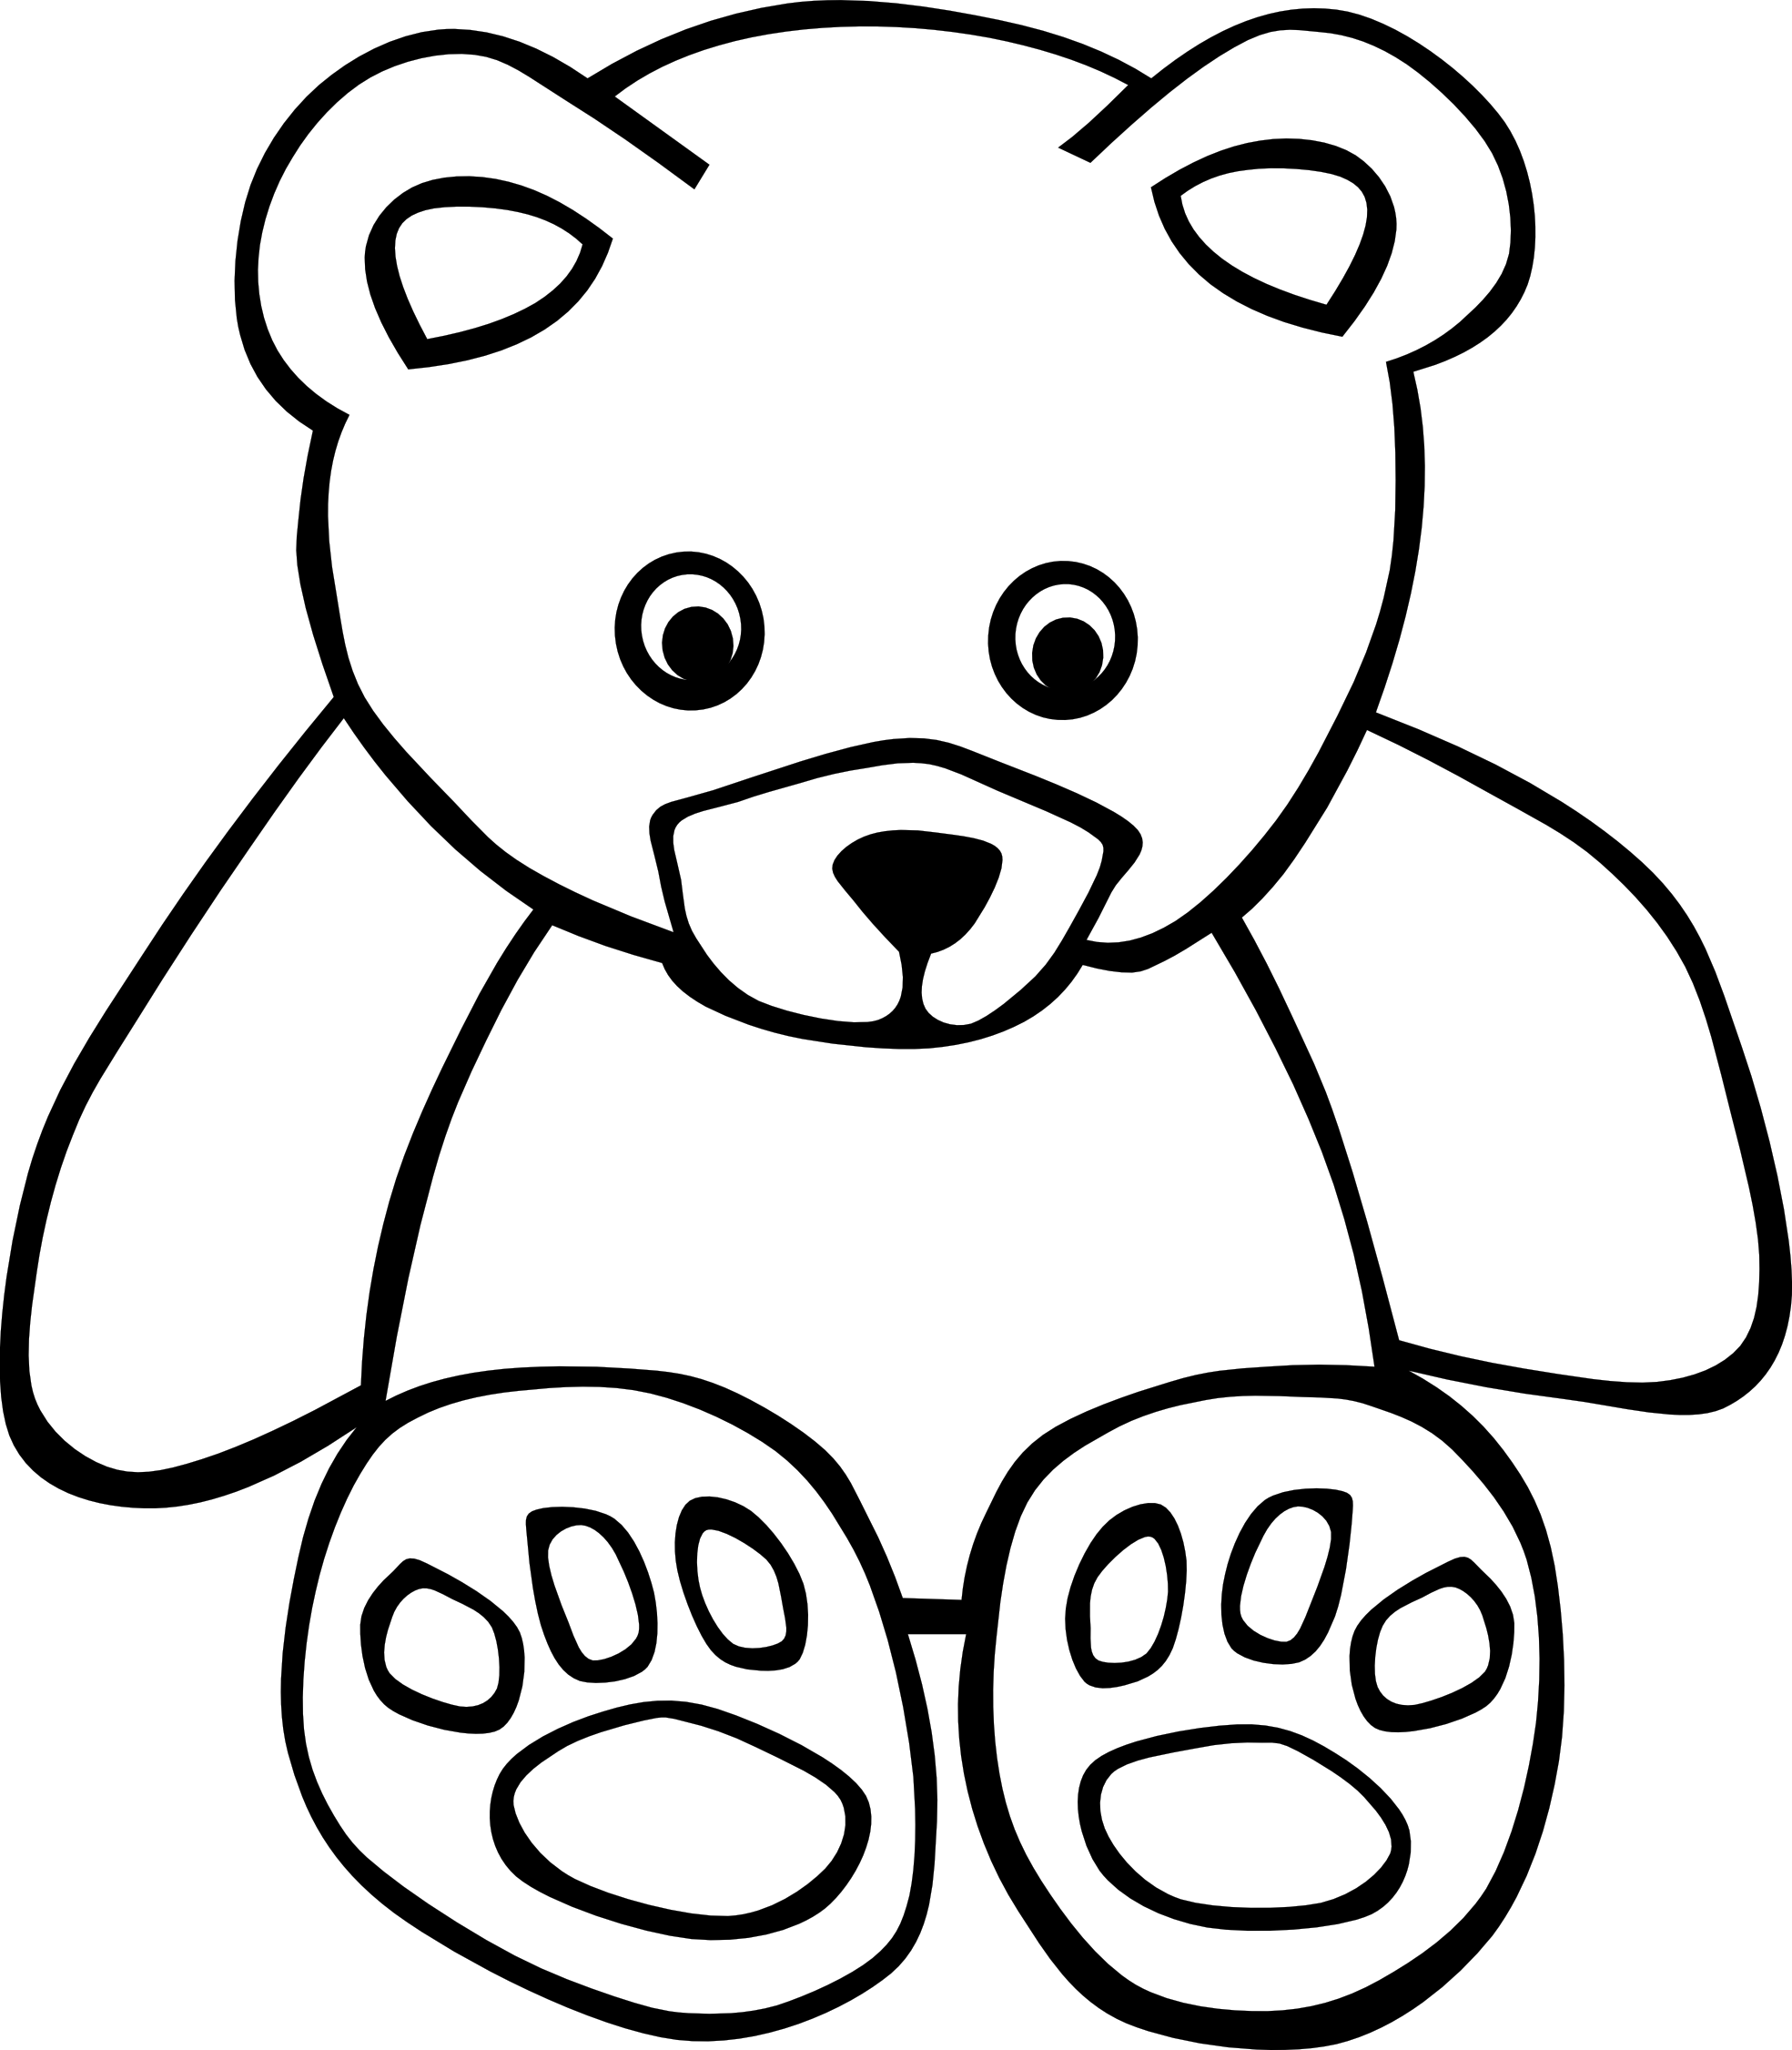 Line Drawing Of Bears - ClipArt Best